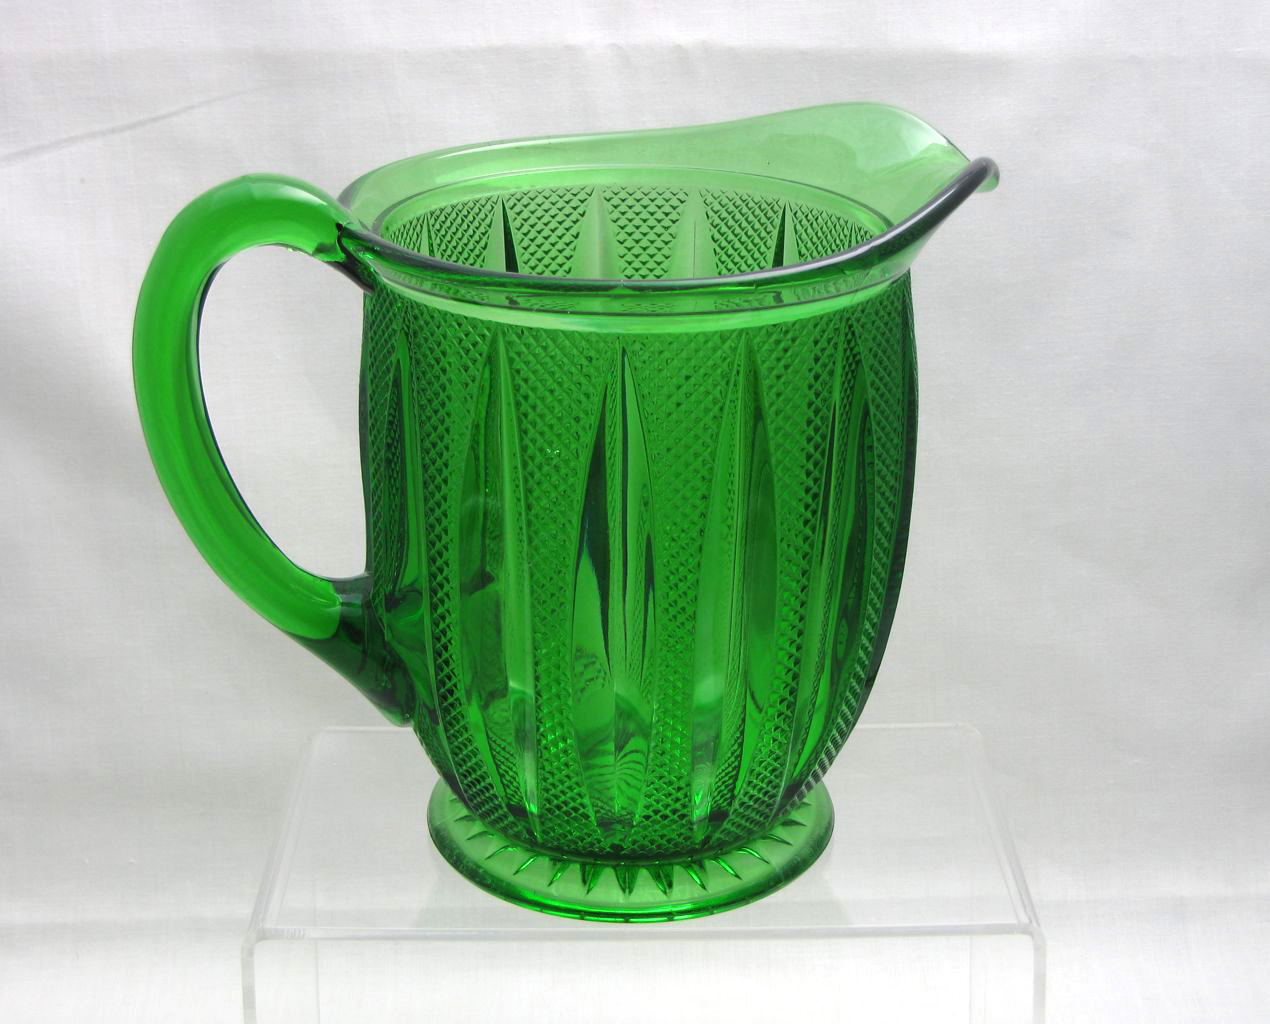 Heisey #150 Pointed Oval in Diamond Point, Jug, Emerald, 1896-1902